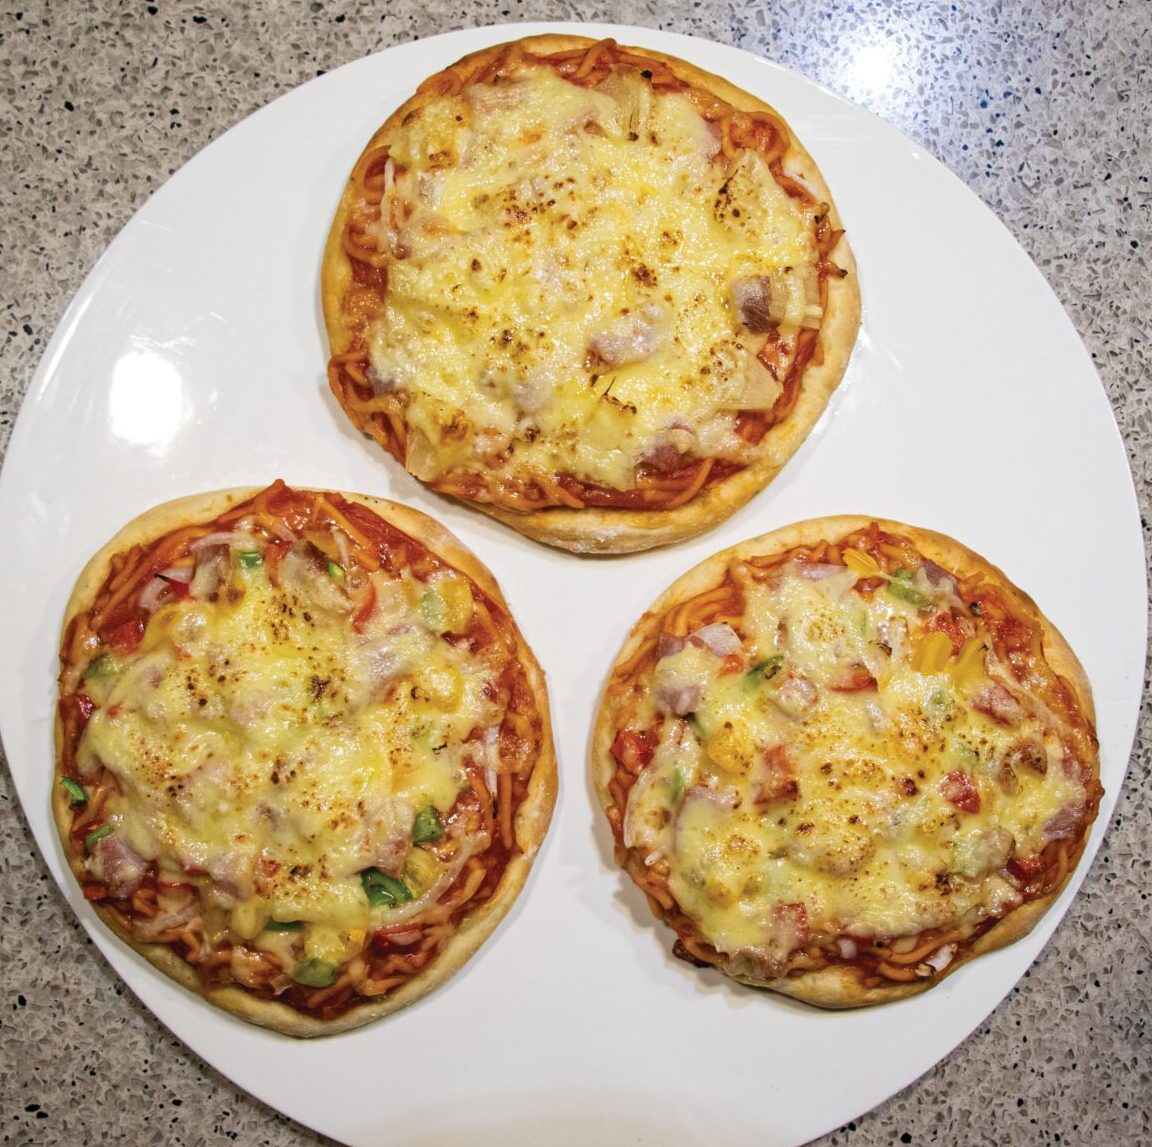 Kids fun - make your own pizza